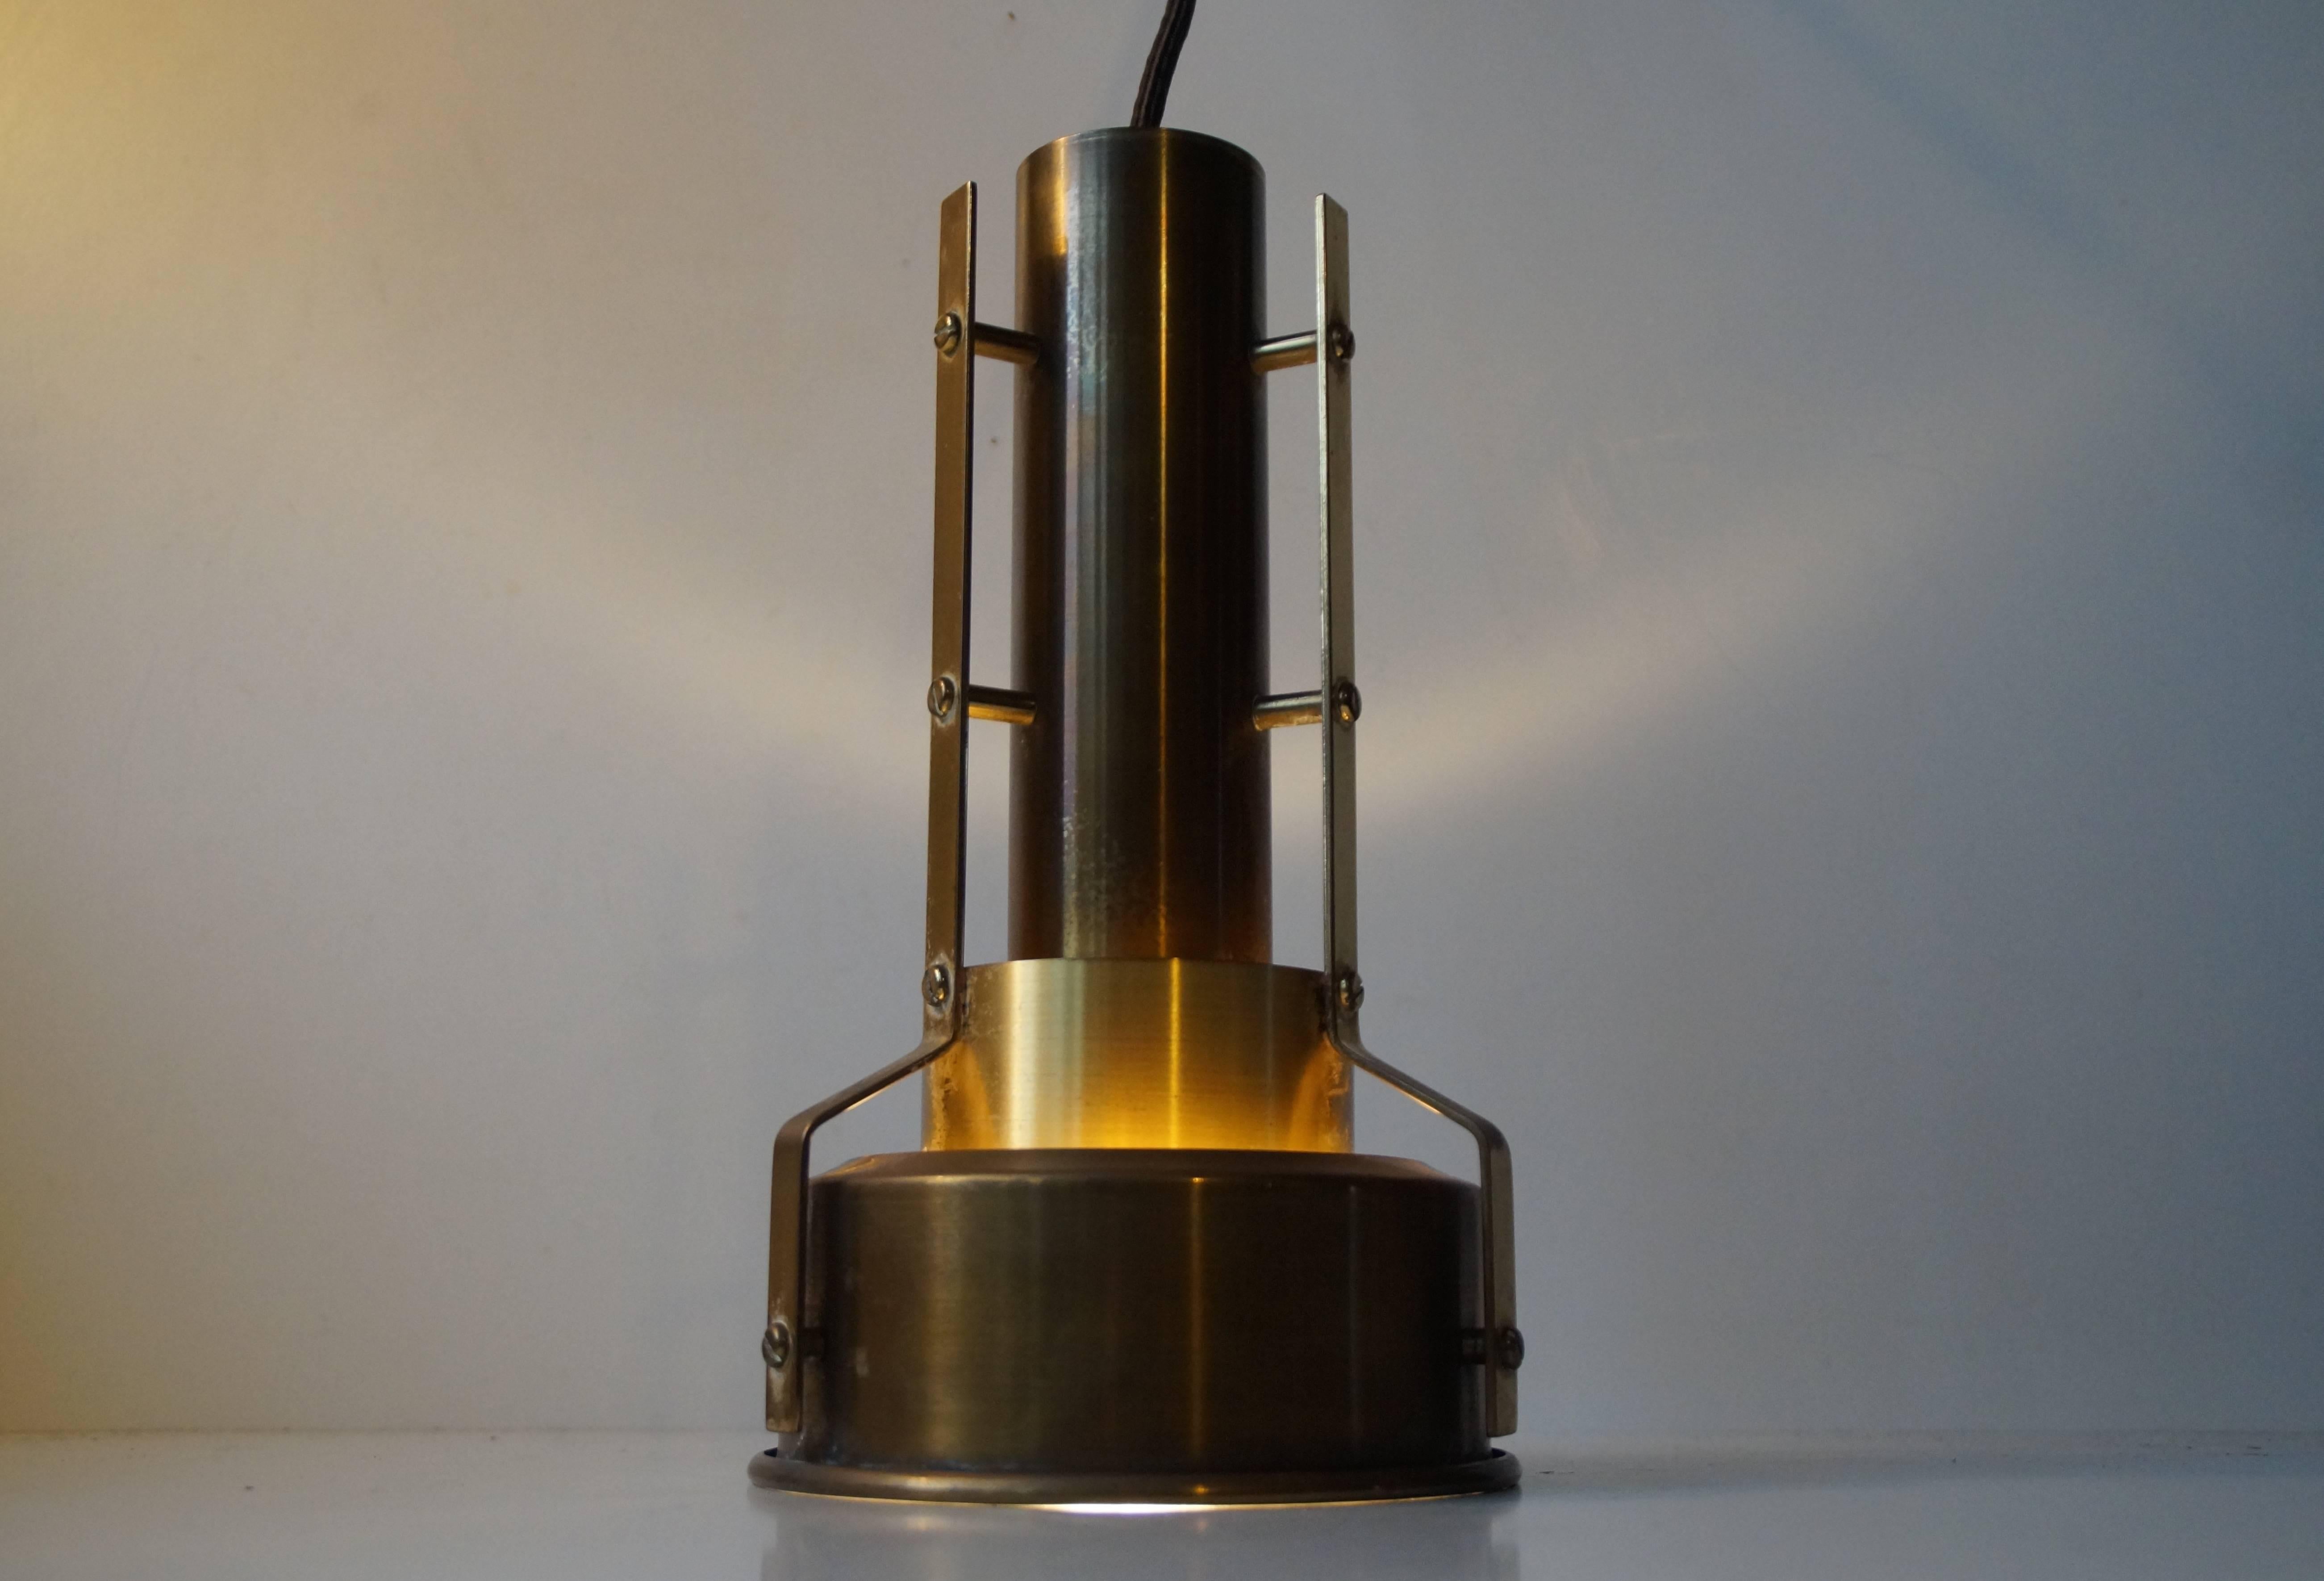 Beautifully made solid brass Pendant Lamp that embraces the Nautical Maritime Theme. Anonymous designer manufacturer. Made in Denmark in the late 1950s to early 1960s.